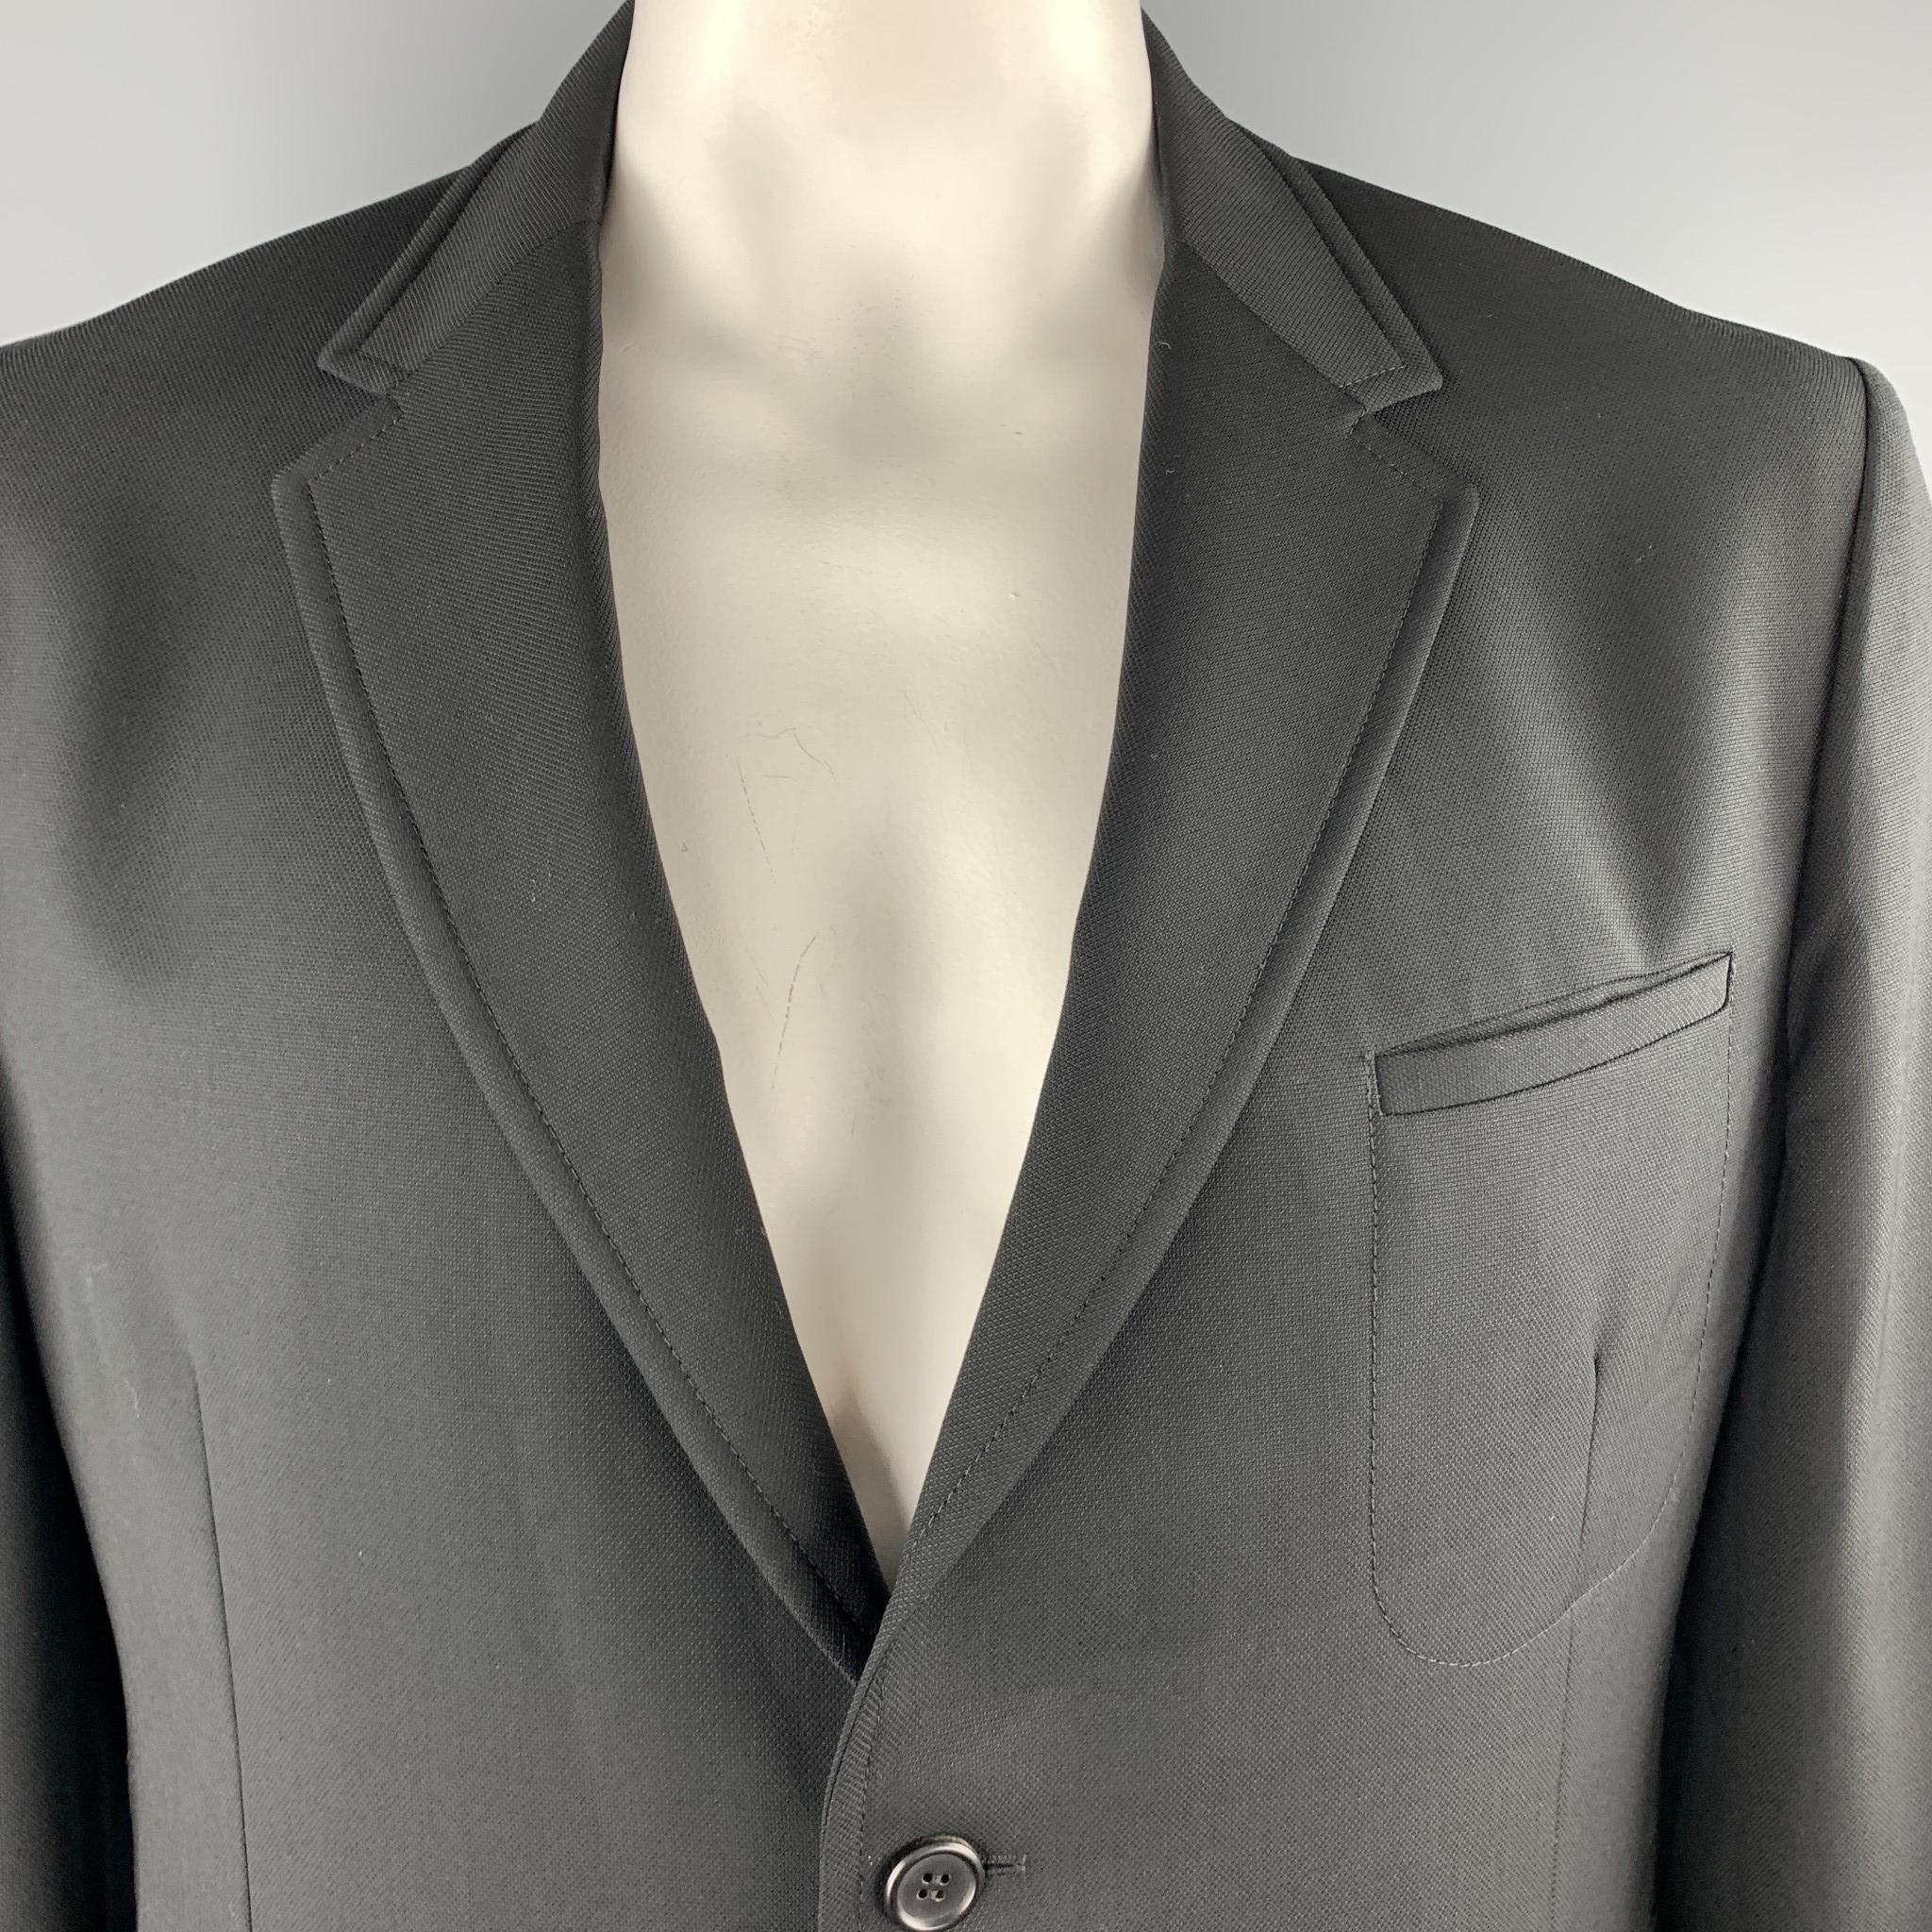 PRADA sport coat comes in woven wool with a notch lapel, single breasted, two button front, and patch pockets. Made in Hungary.

New with Tags. 
Marked: IT 56

Measurements:

Shoulder: 19 in.
Chest: 46 in.
Sleeve: 27 in.
Length: 30 in. 